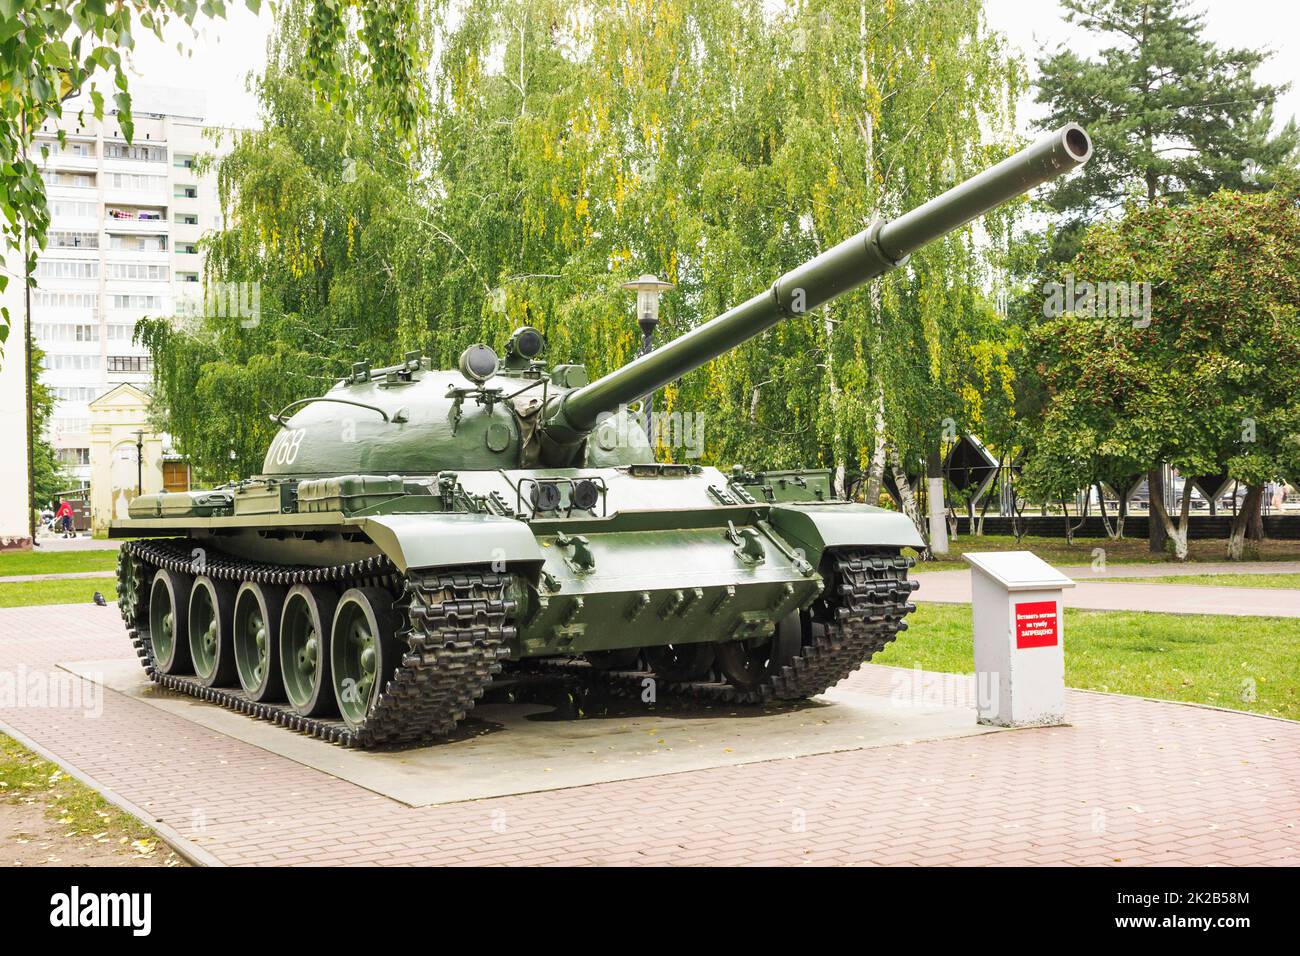 Bor, Russia - 16 Sep, 2022: Soviet medium panzer T-62, combat weight 37 tons, year of operation 1961. Presented outdoors in the city of Bor Stock Photo